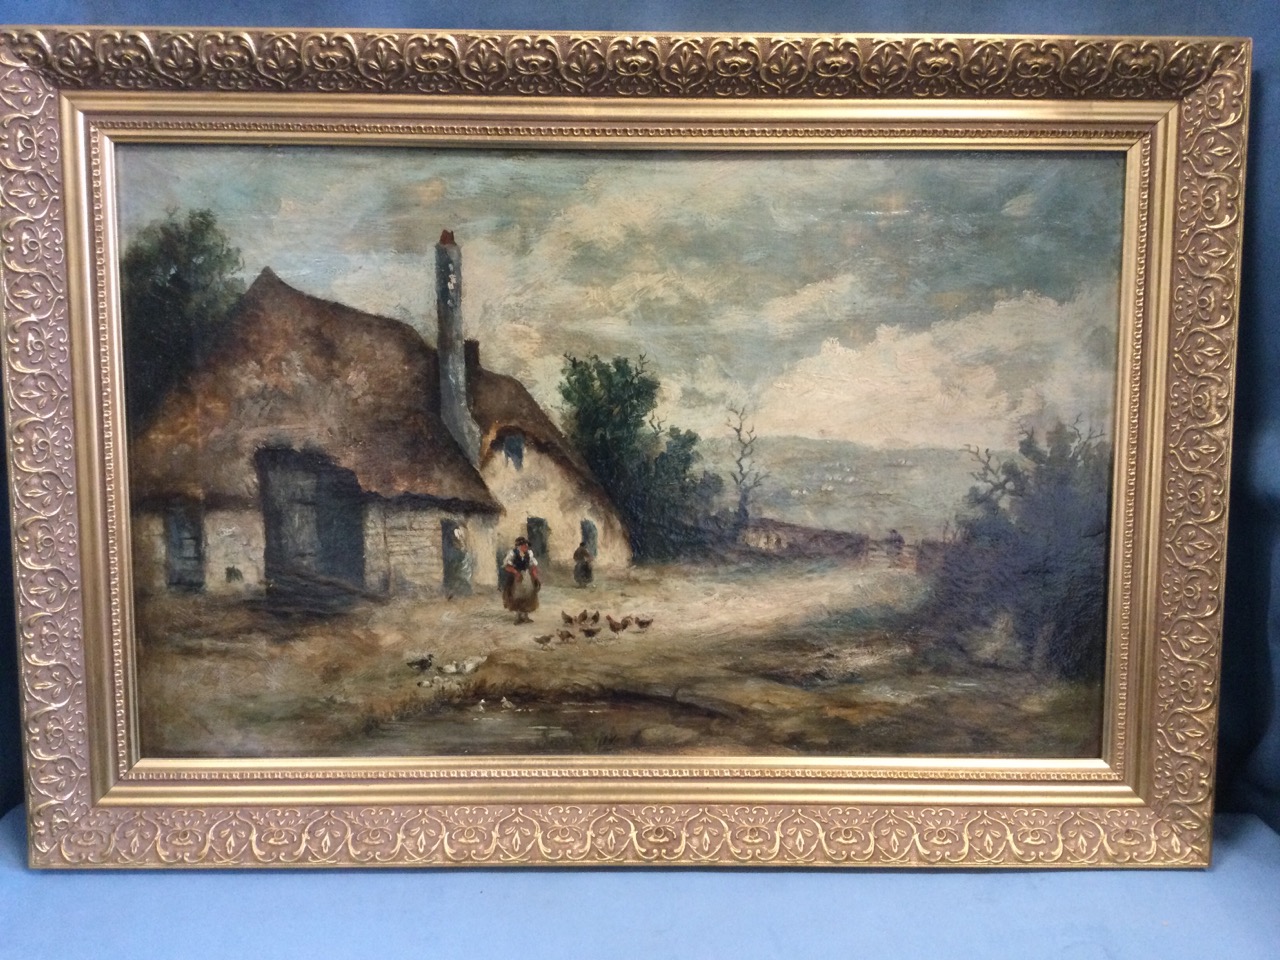 Nineteenth century oil on canvas, country landscape scene with cottage and figures with ducks & - Image 2 of 3